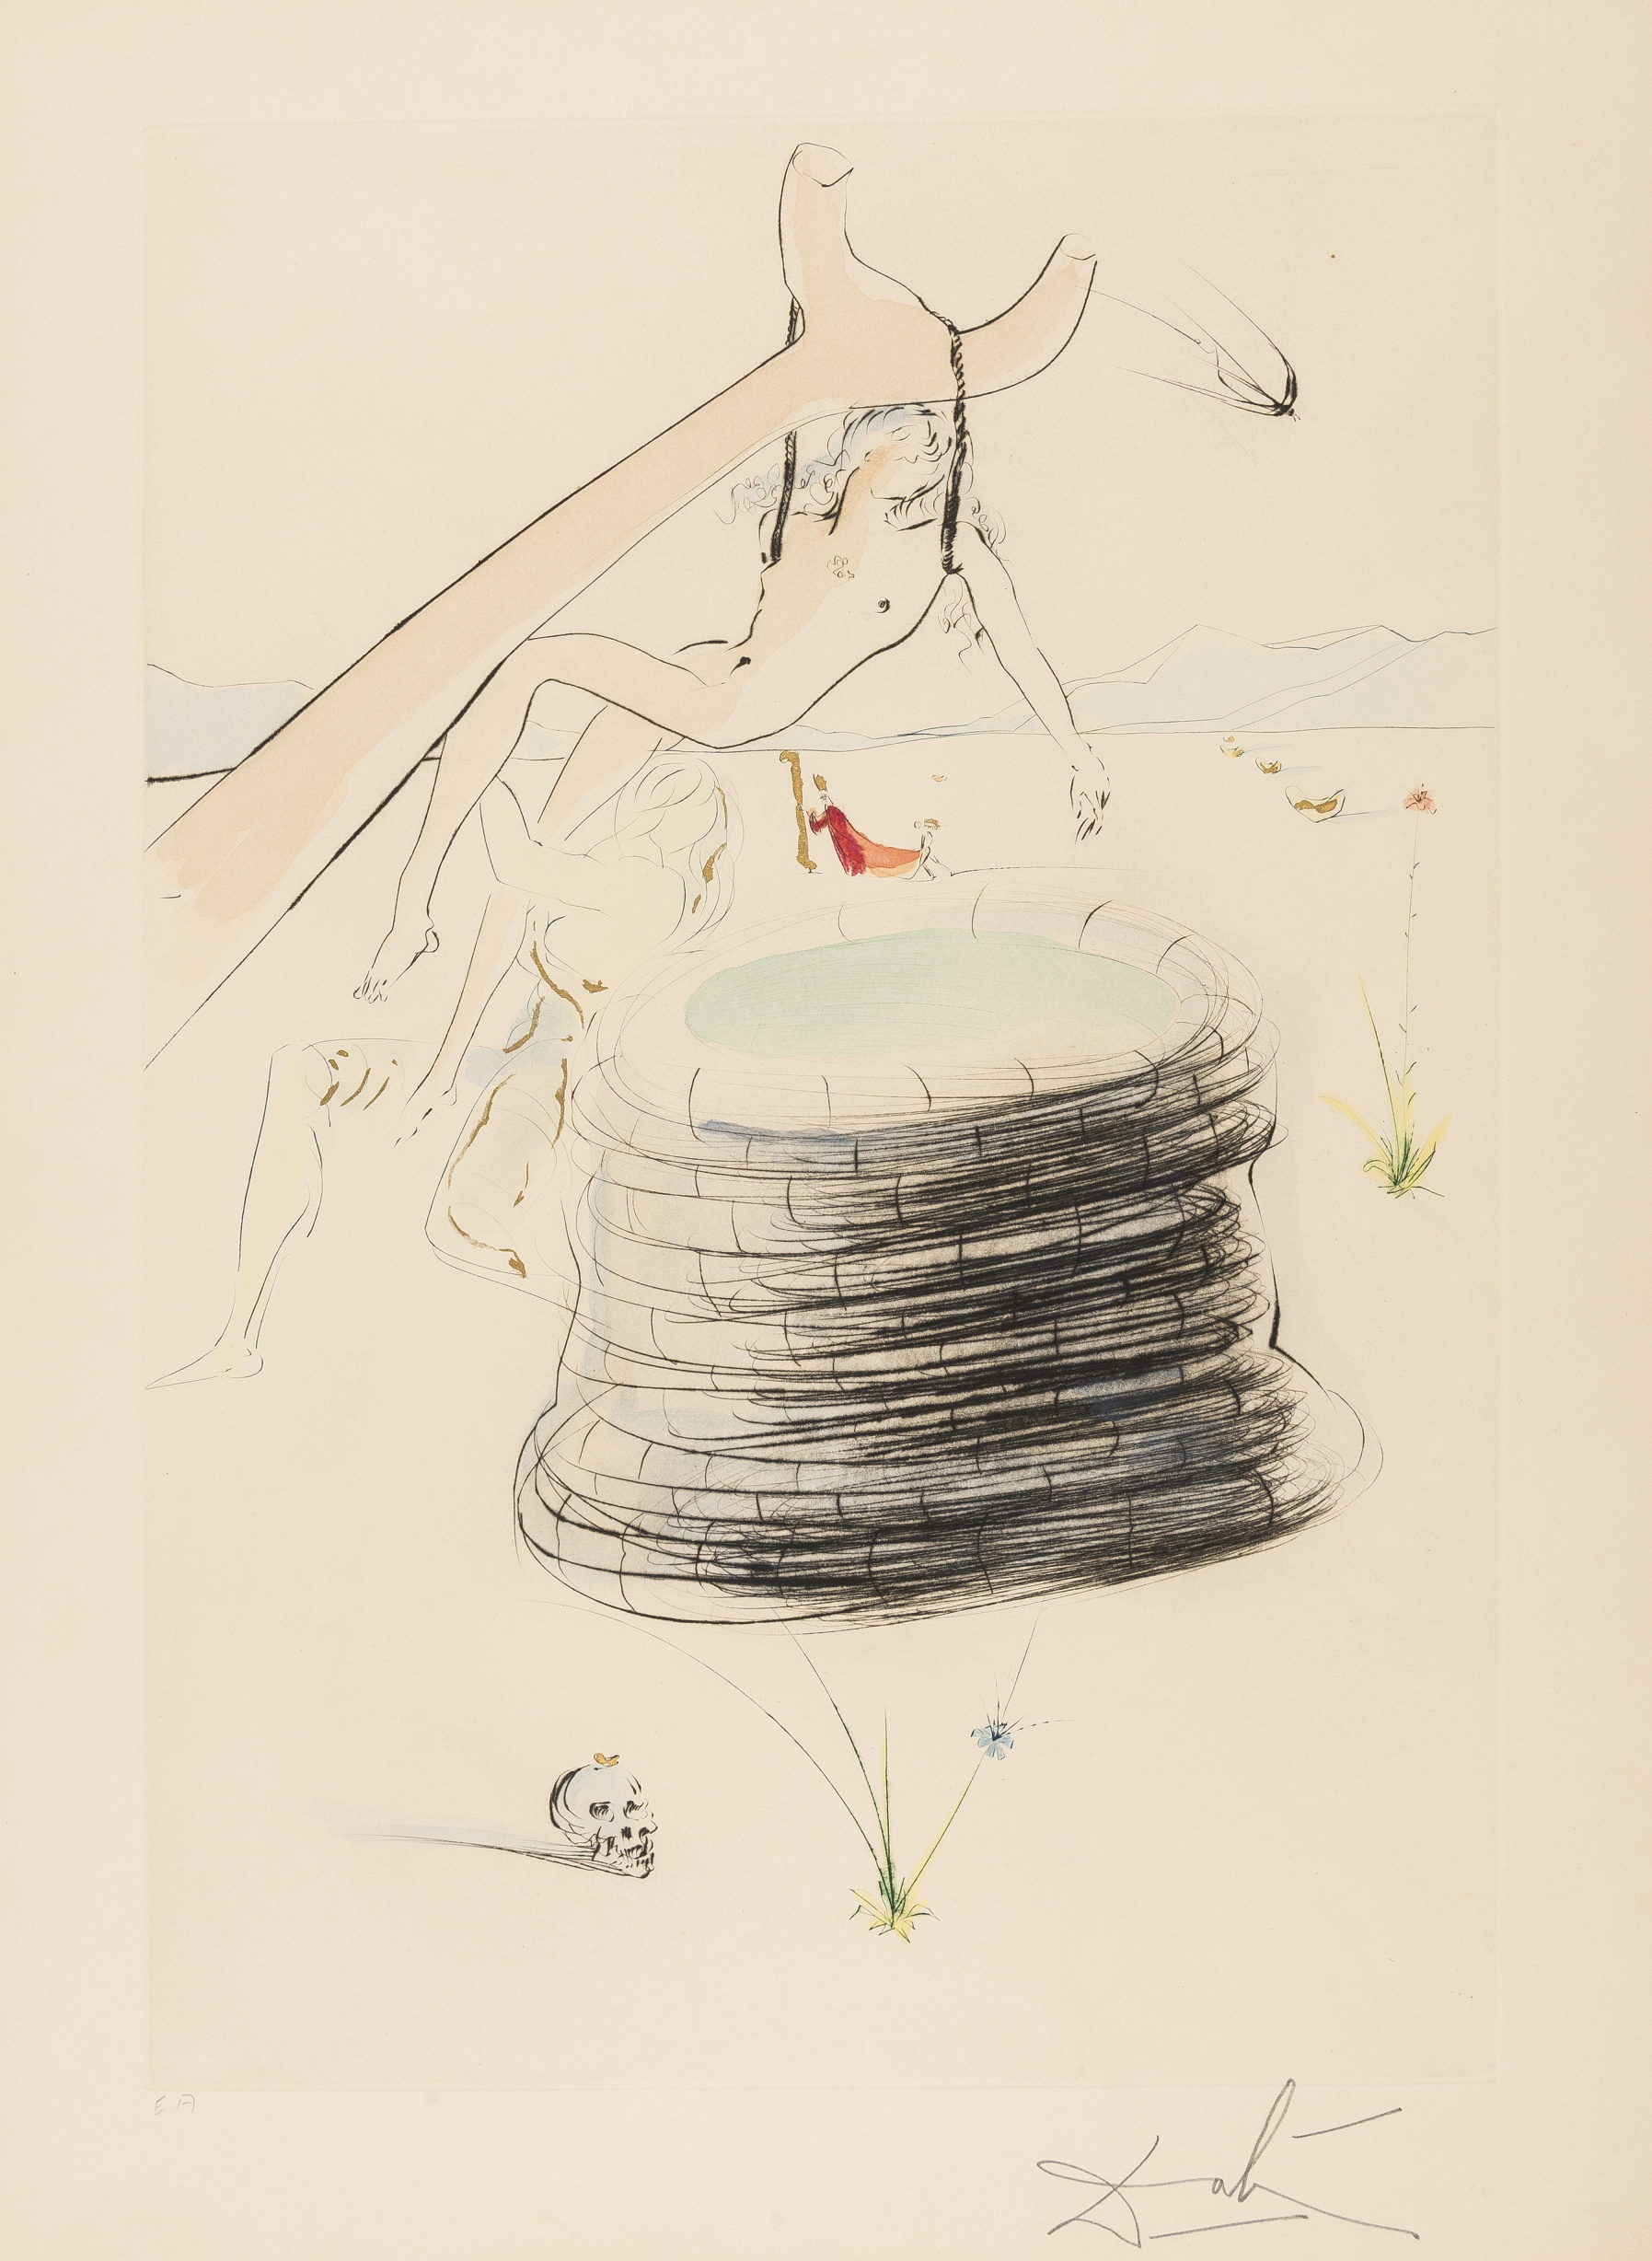 Salvador Dali (1904-1989) Joseph (from Our Historical Heritage) (M & L 753; Field 75-4-I)